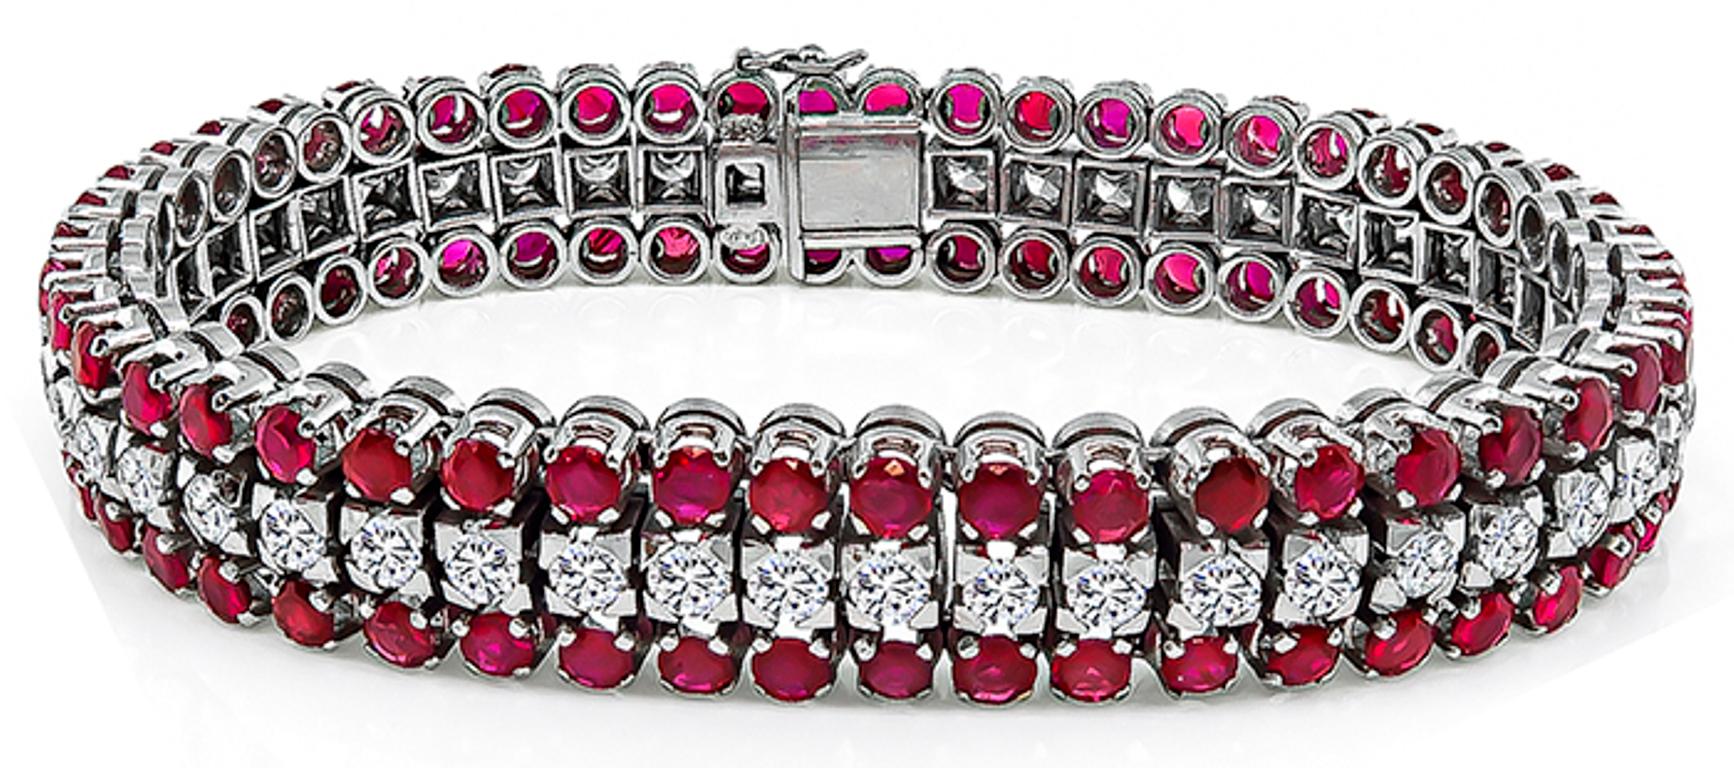 This elegant 18k white gold bracelet is set with sparkling European cut diamonds that weigh approximately 3.75ct. graded H color with VS clarity. The diamonds are accentuated by lovely round cut rubies that weigh approximately 9.00ct. The bracelet